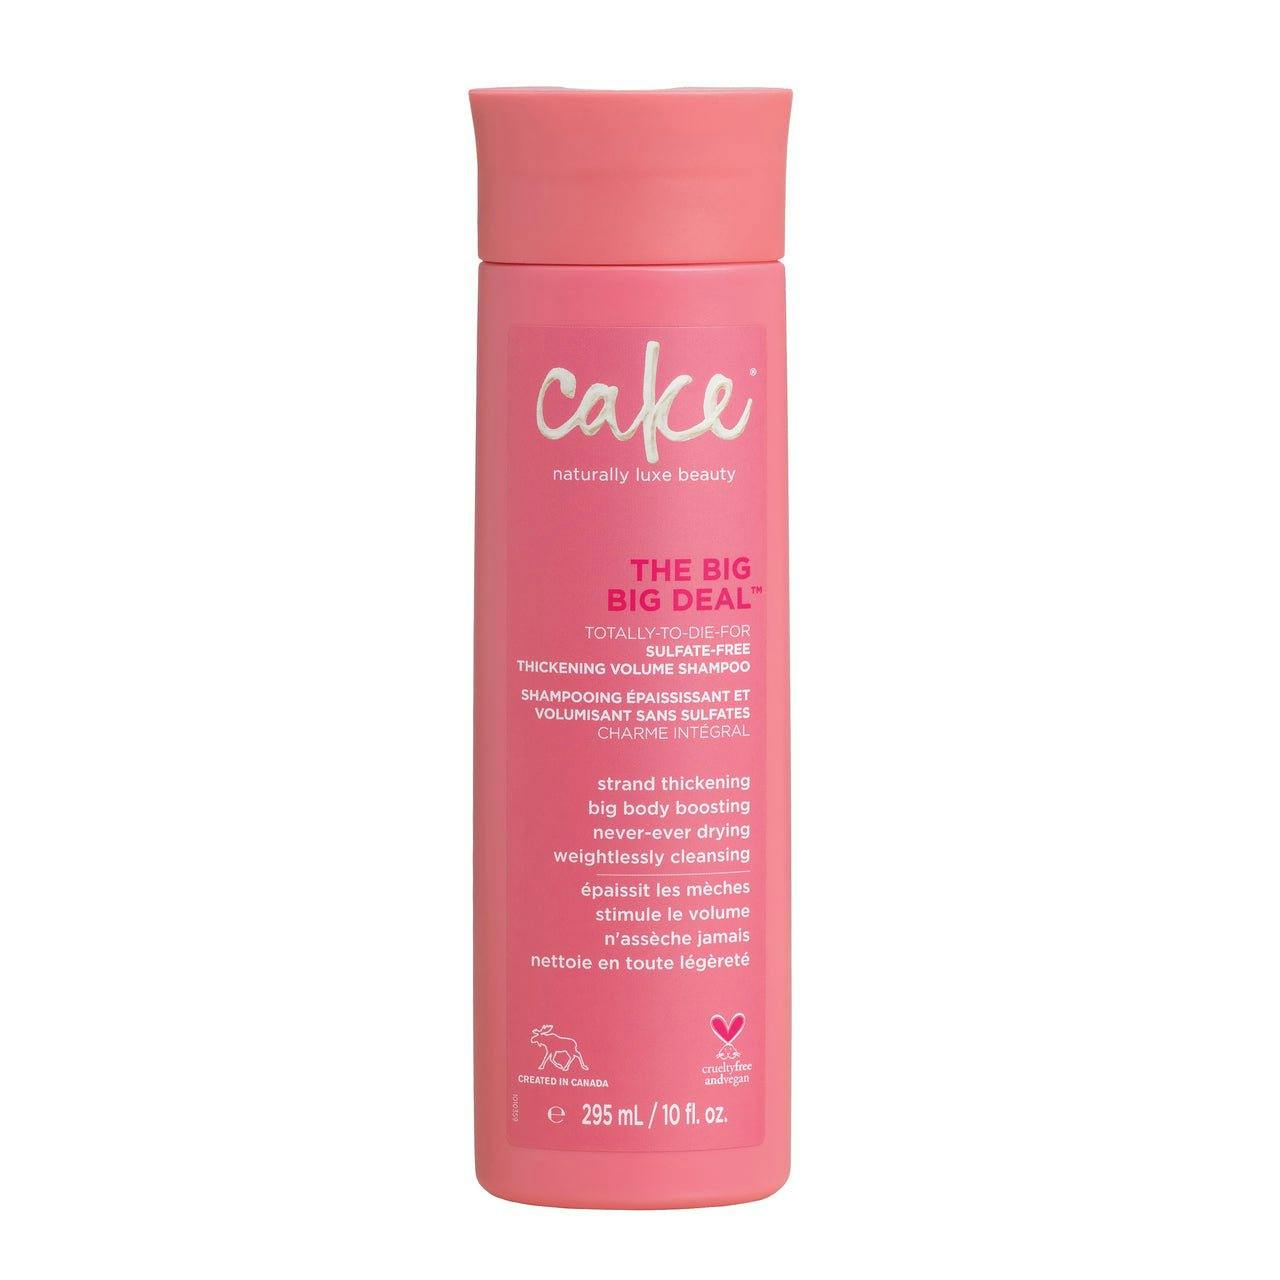 Cake The Big Deal Sulfate Free Thickening Volume Shampoo 295ml